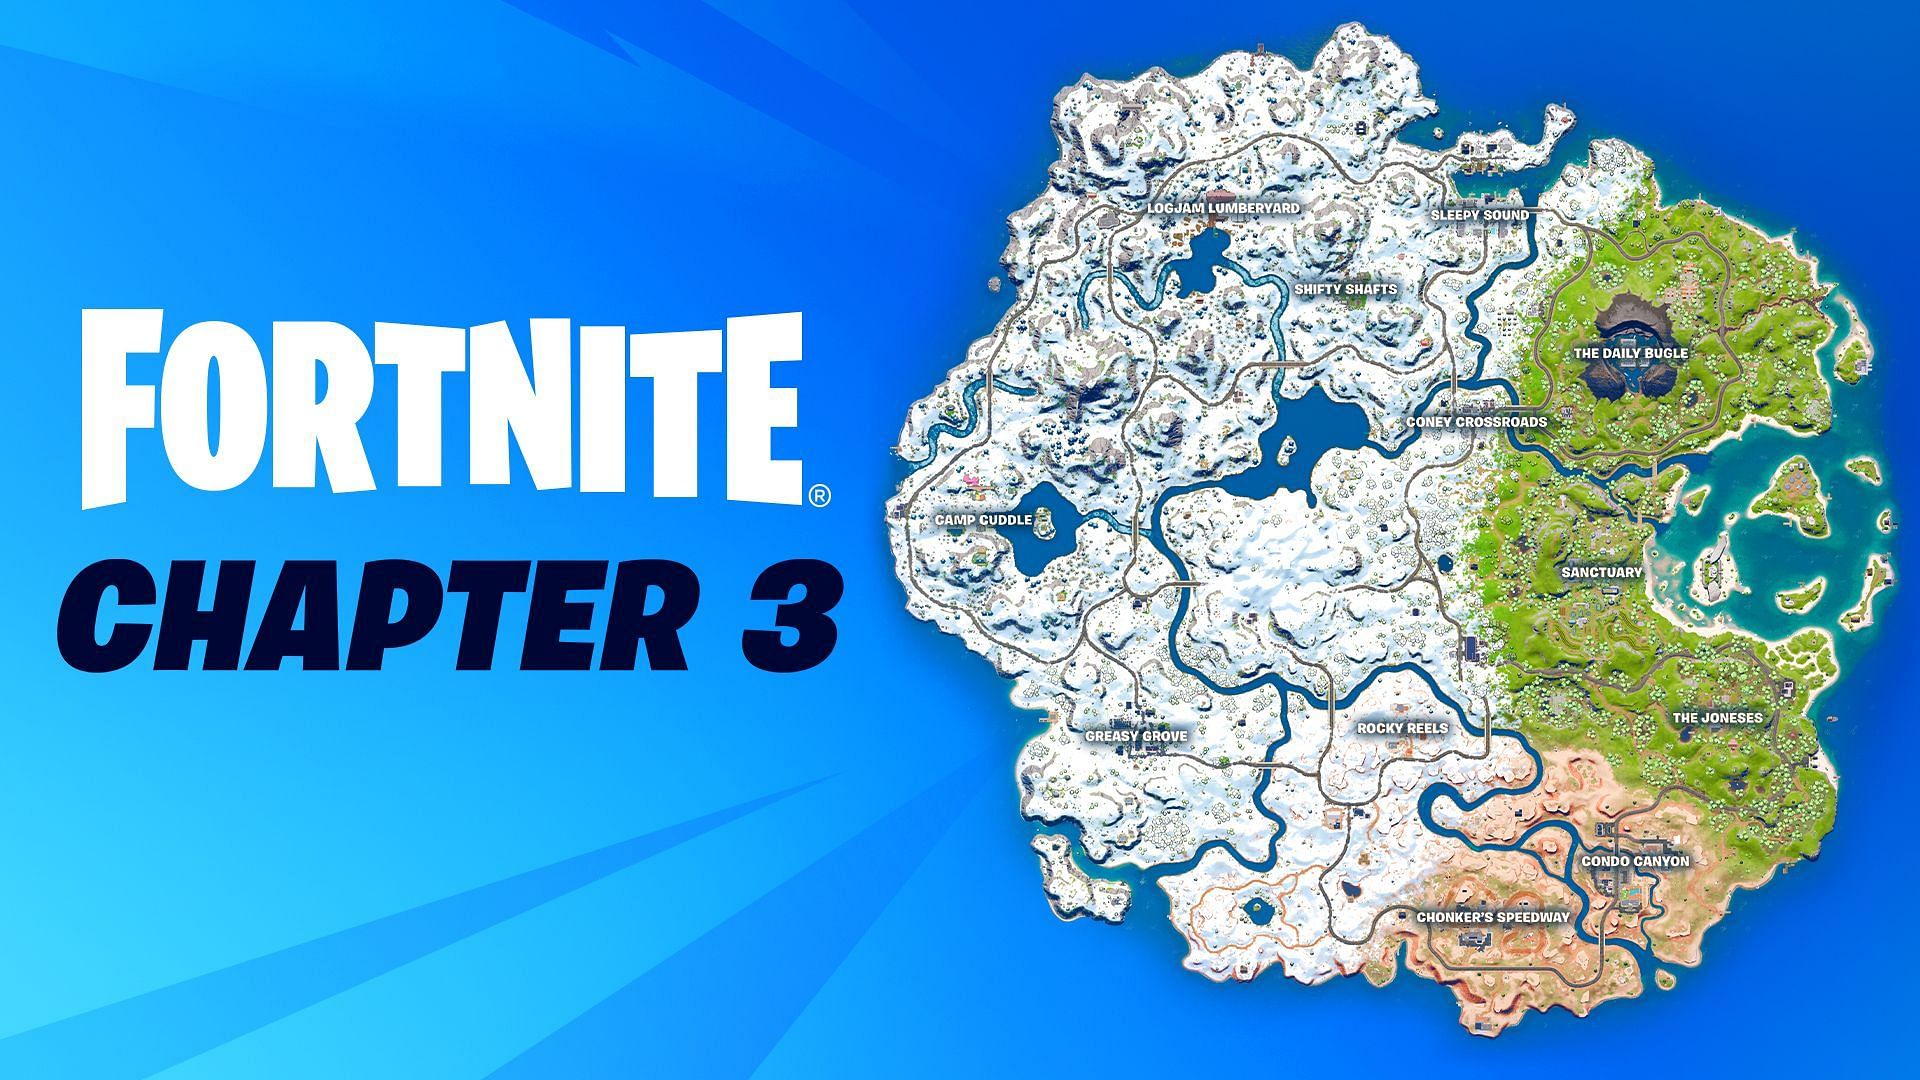 Cuddle Monsters - First Person - Fortnite Creative Map Code - Dropnite